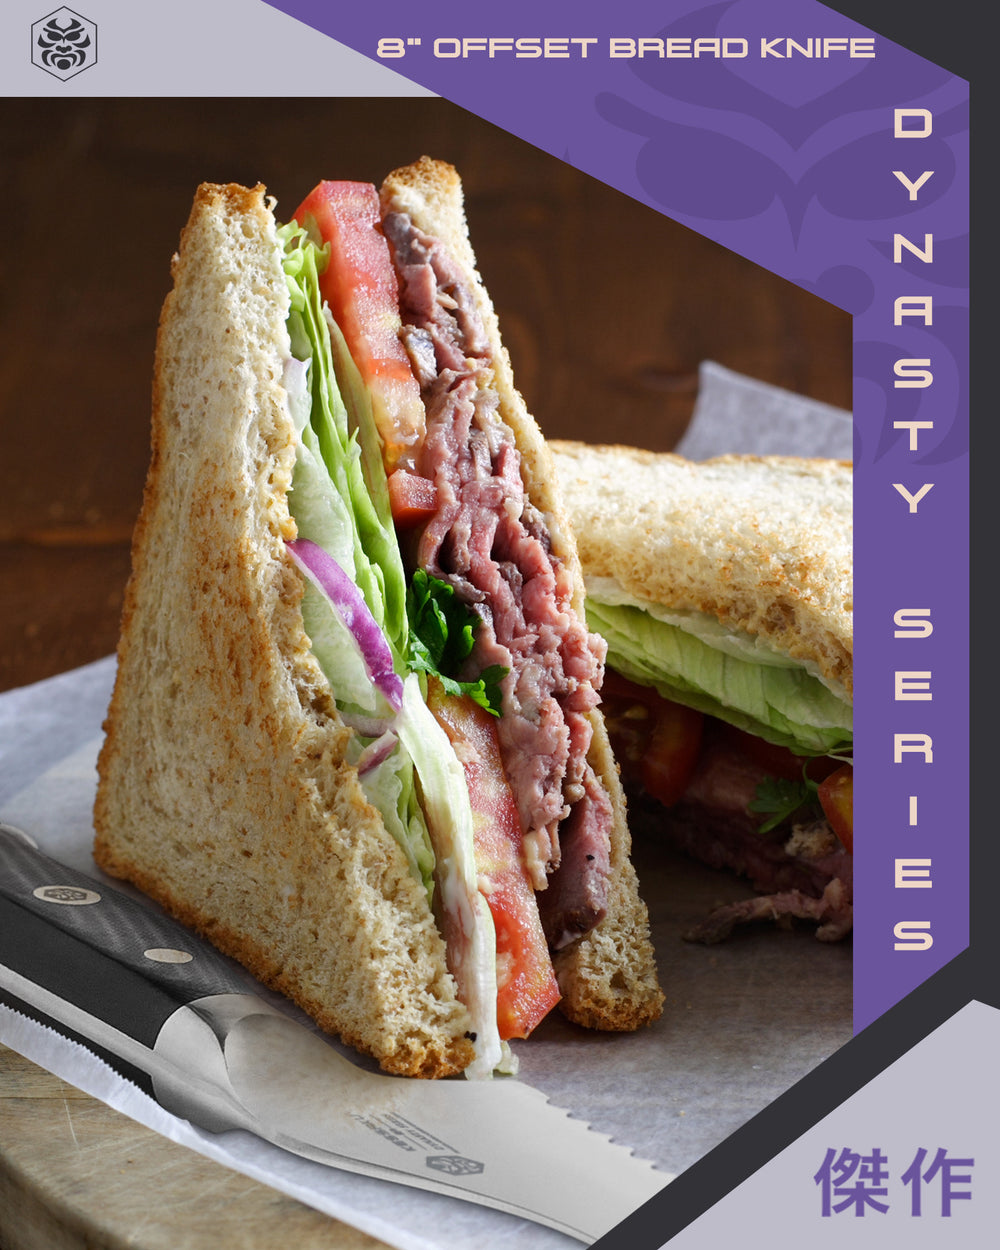 The Dynasty Offset Deli Knife used to make a roast beef sandwich with lettuce, tomato, and red onion on toasted bread